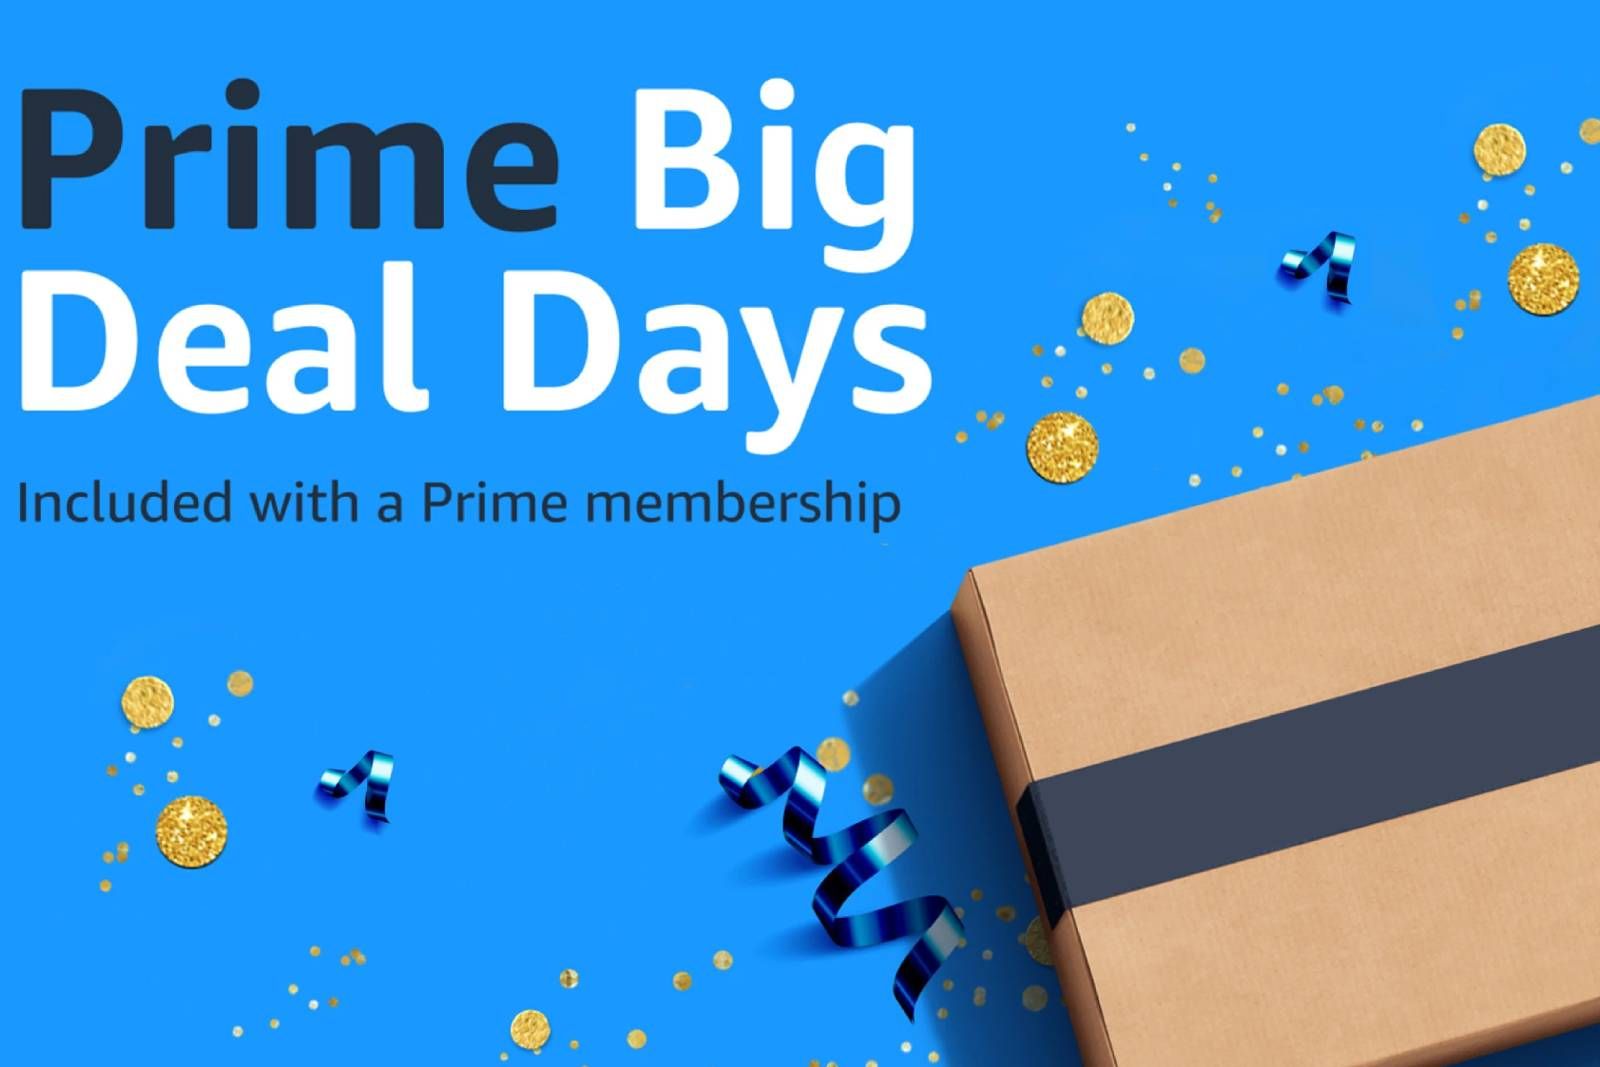 What is  Prime Big Deal Days and when is it?